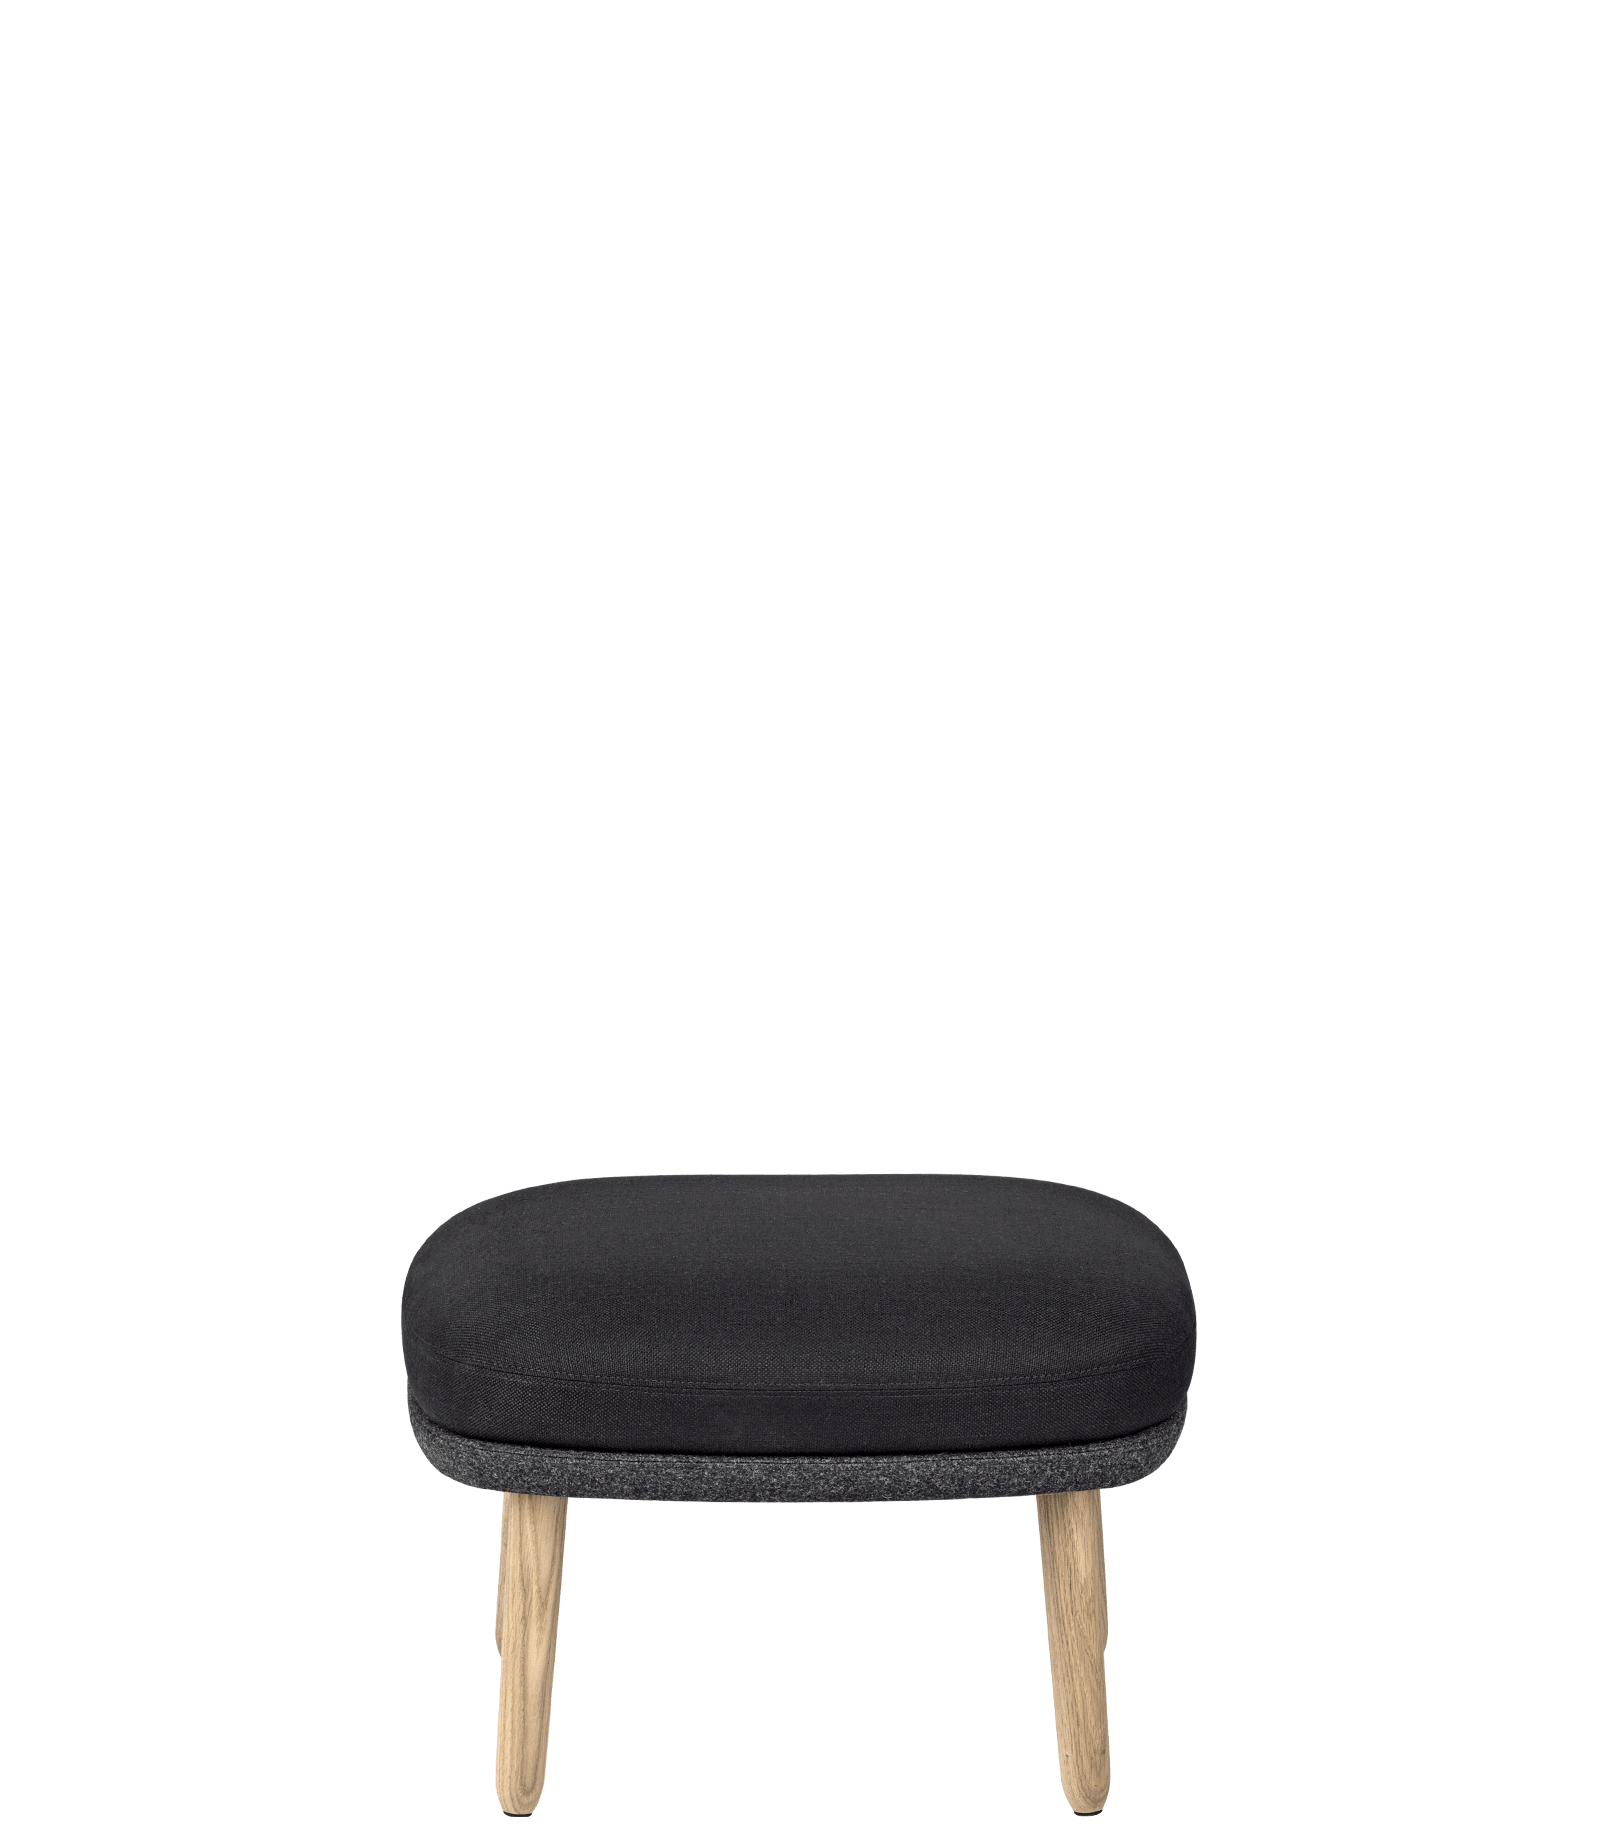 Footstool Download Free HD Image PNG Image